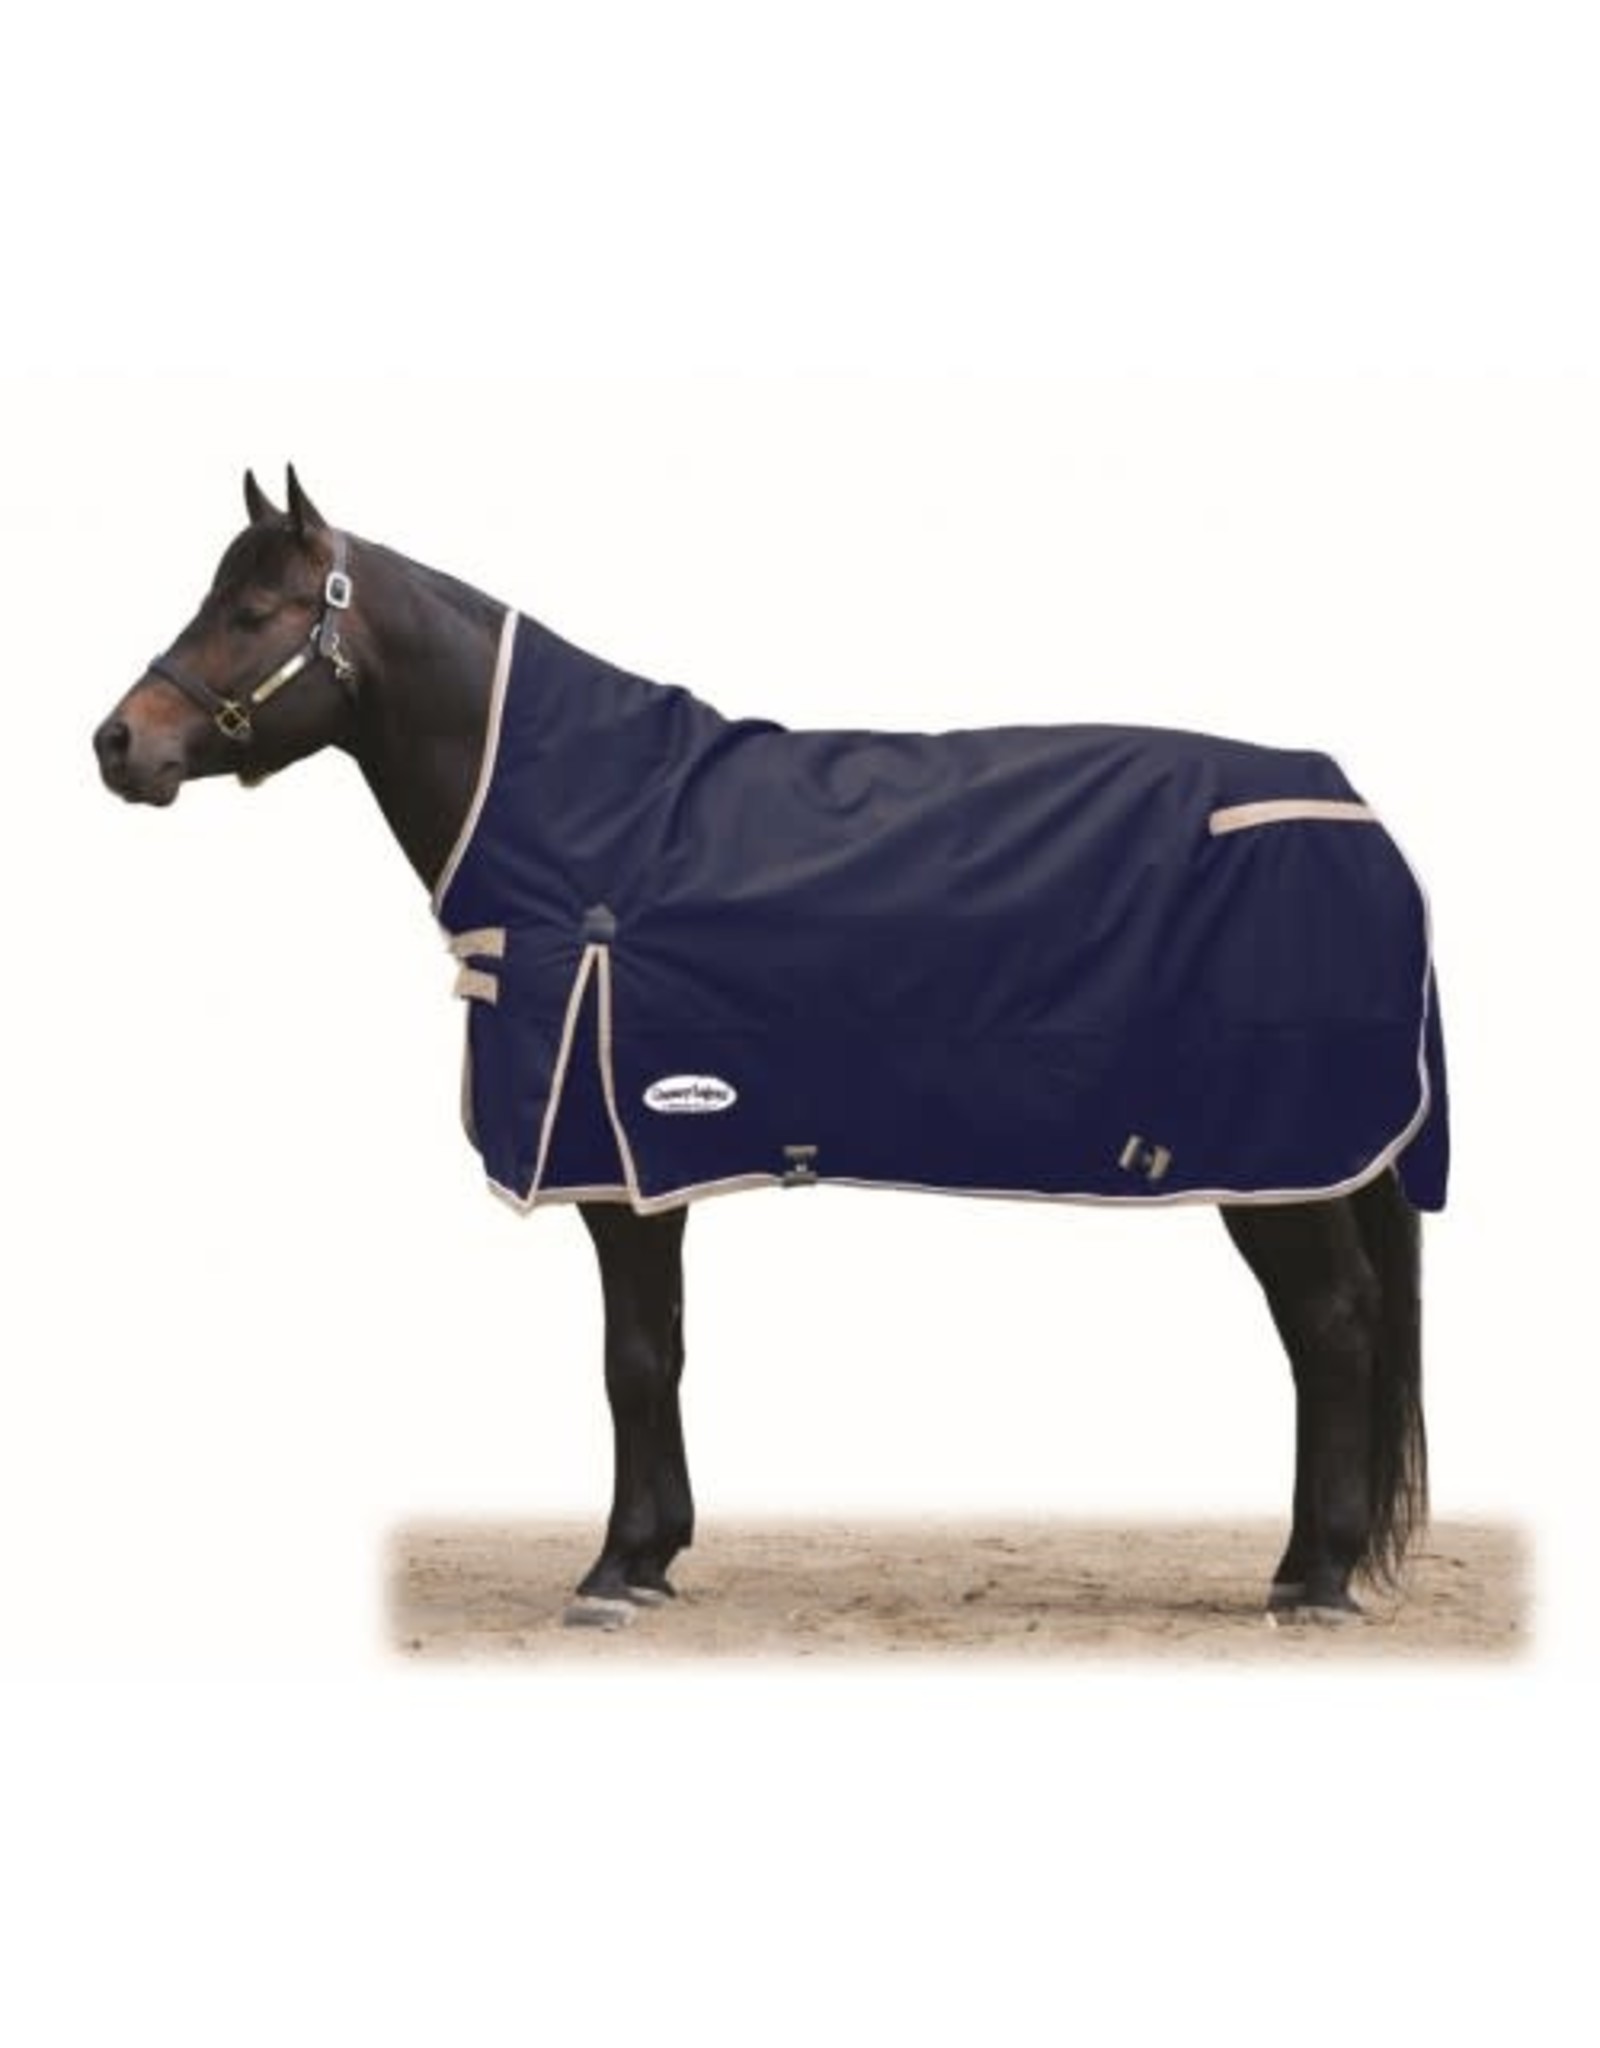 Country Legend BLANKET* Country Legend Turnout Half Neck  - Navy 280g 74" - 317577-74